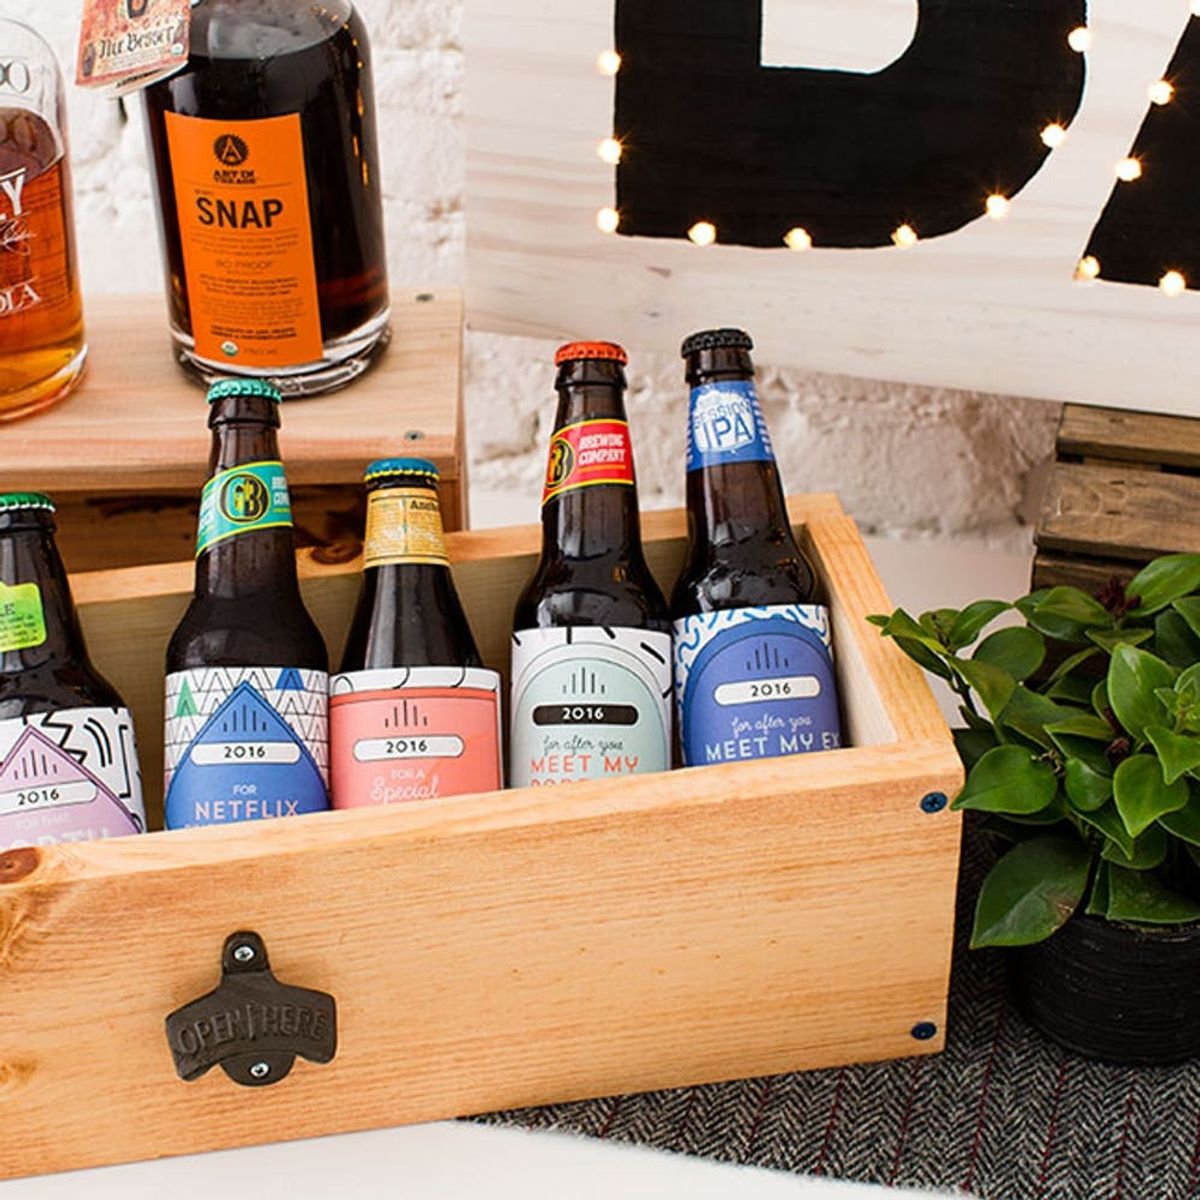 This Beer Box Is the Perfect Valentine’s Day Gift for Him